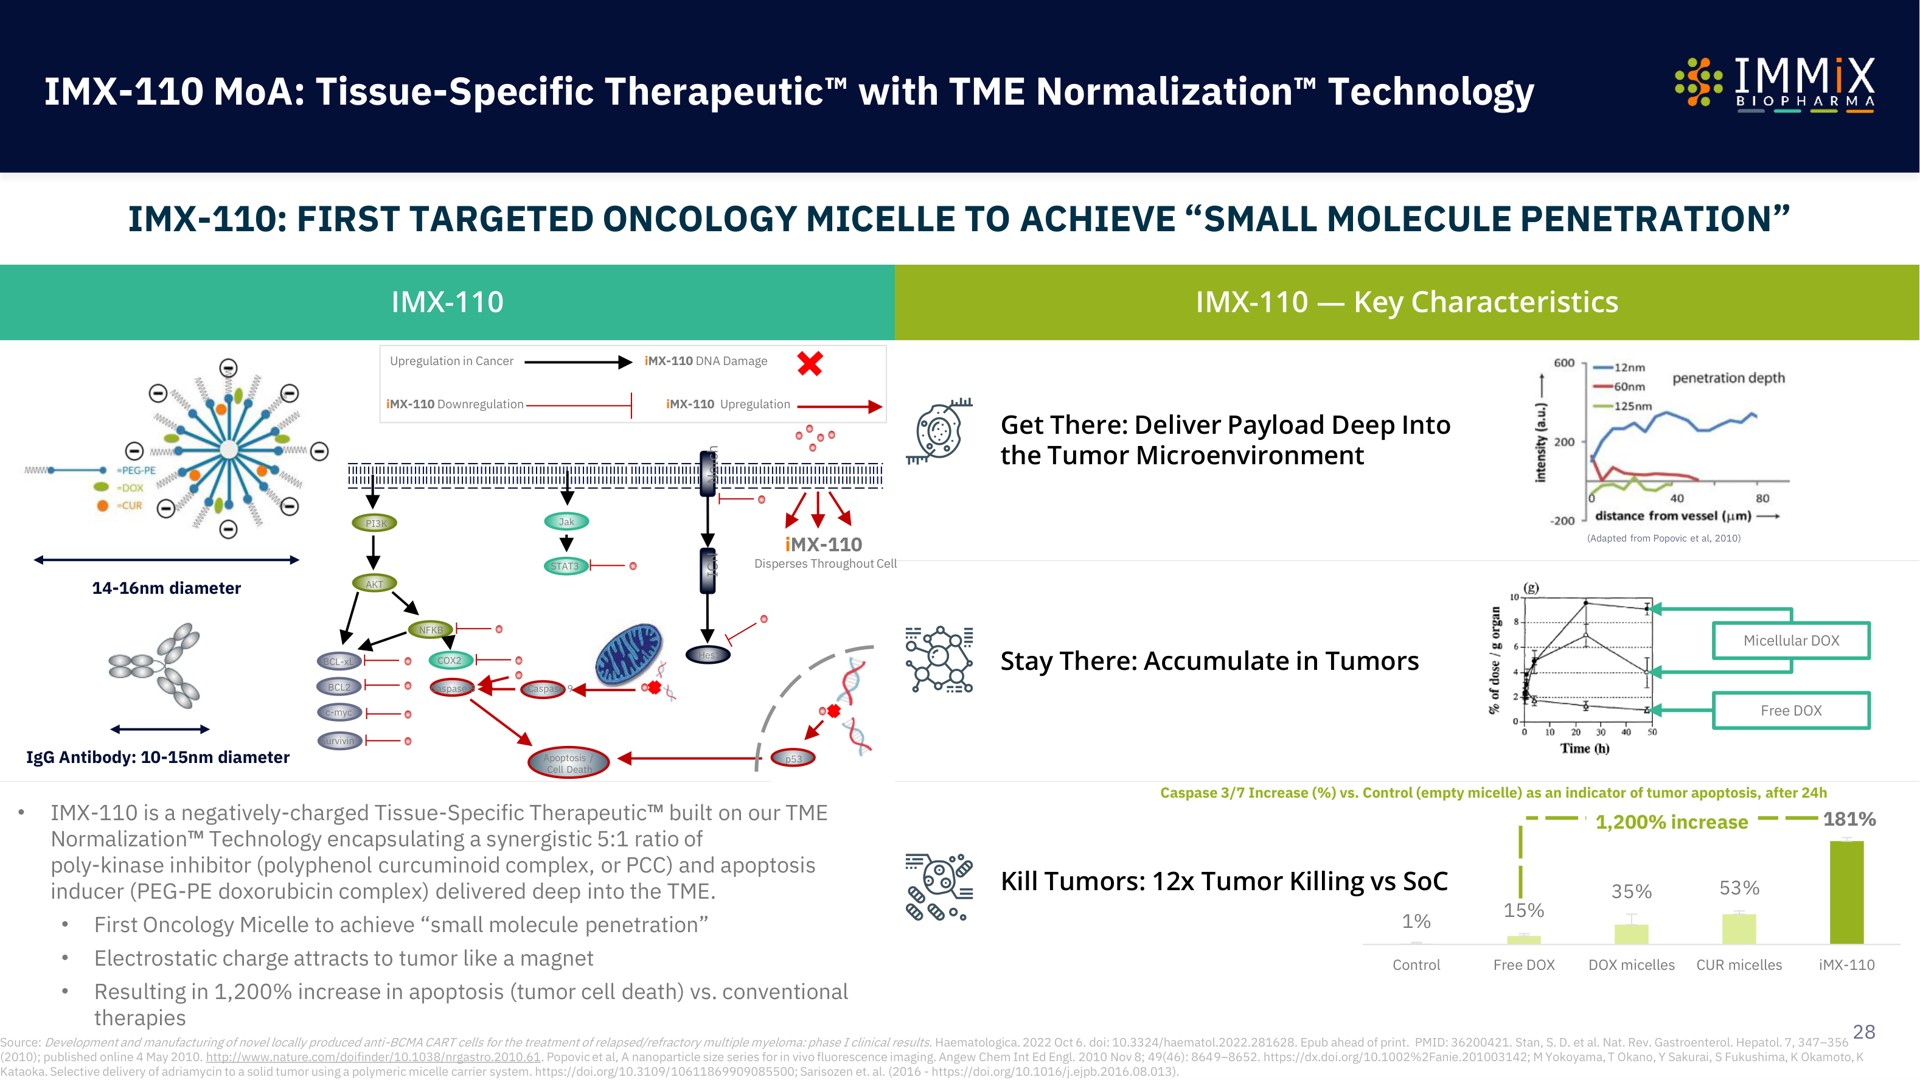 tissue specific therapeutic with normalization technology first targeted oncology micelle to achieve small molecule penetration a | Immix Biopharma